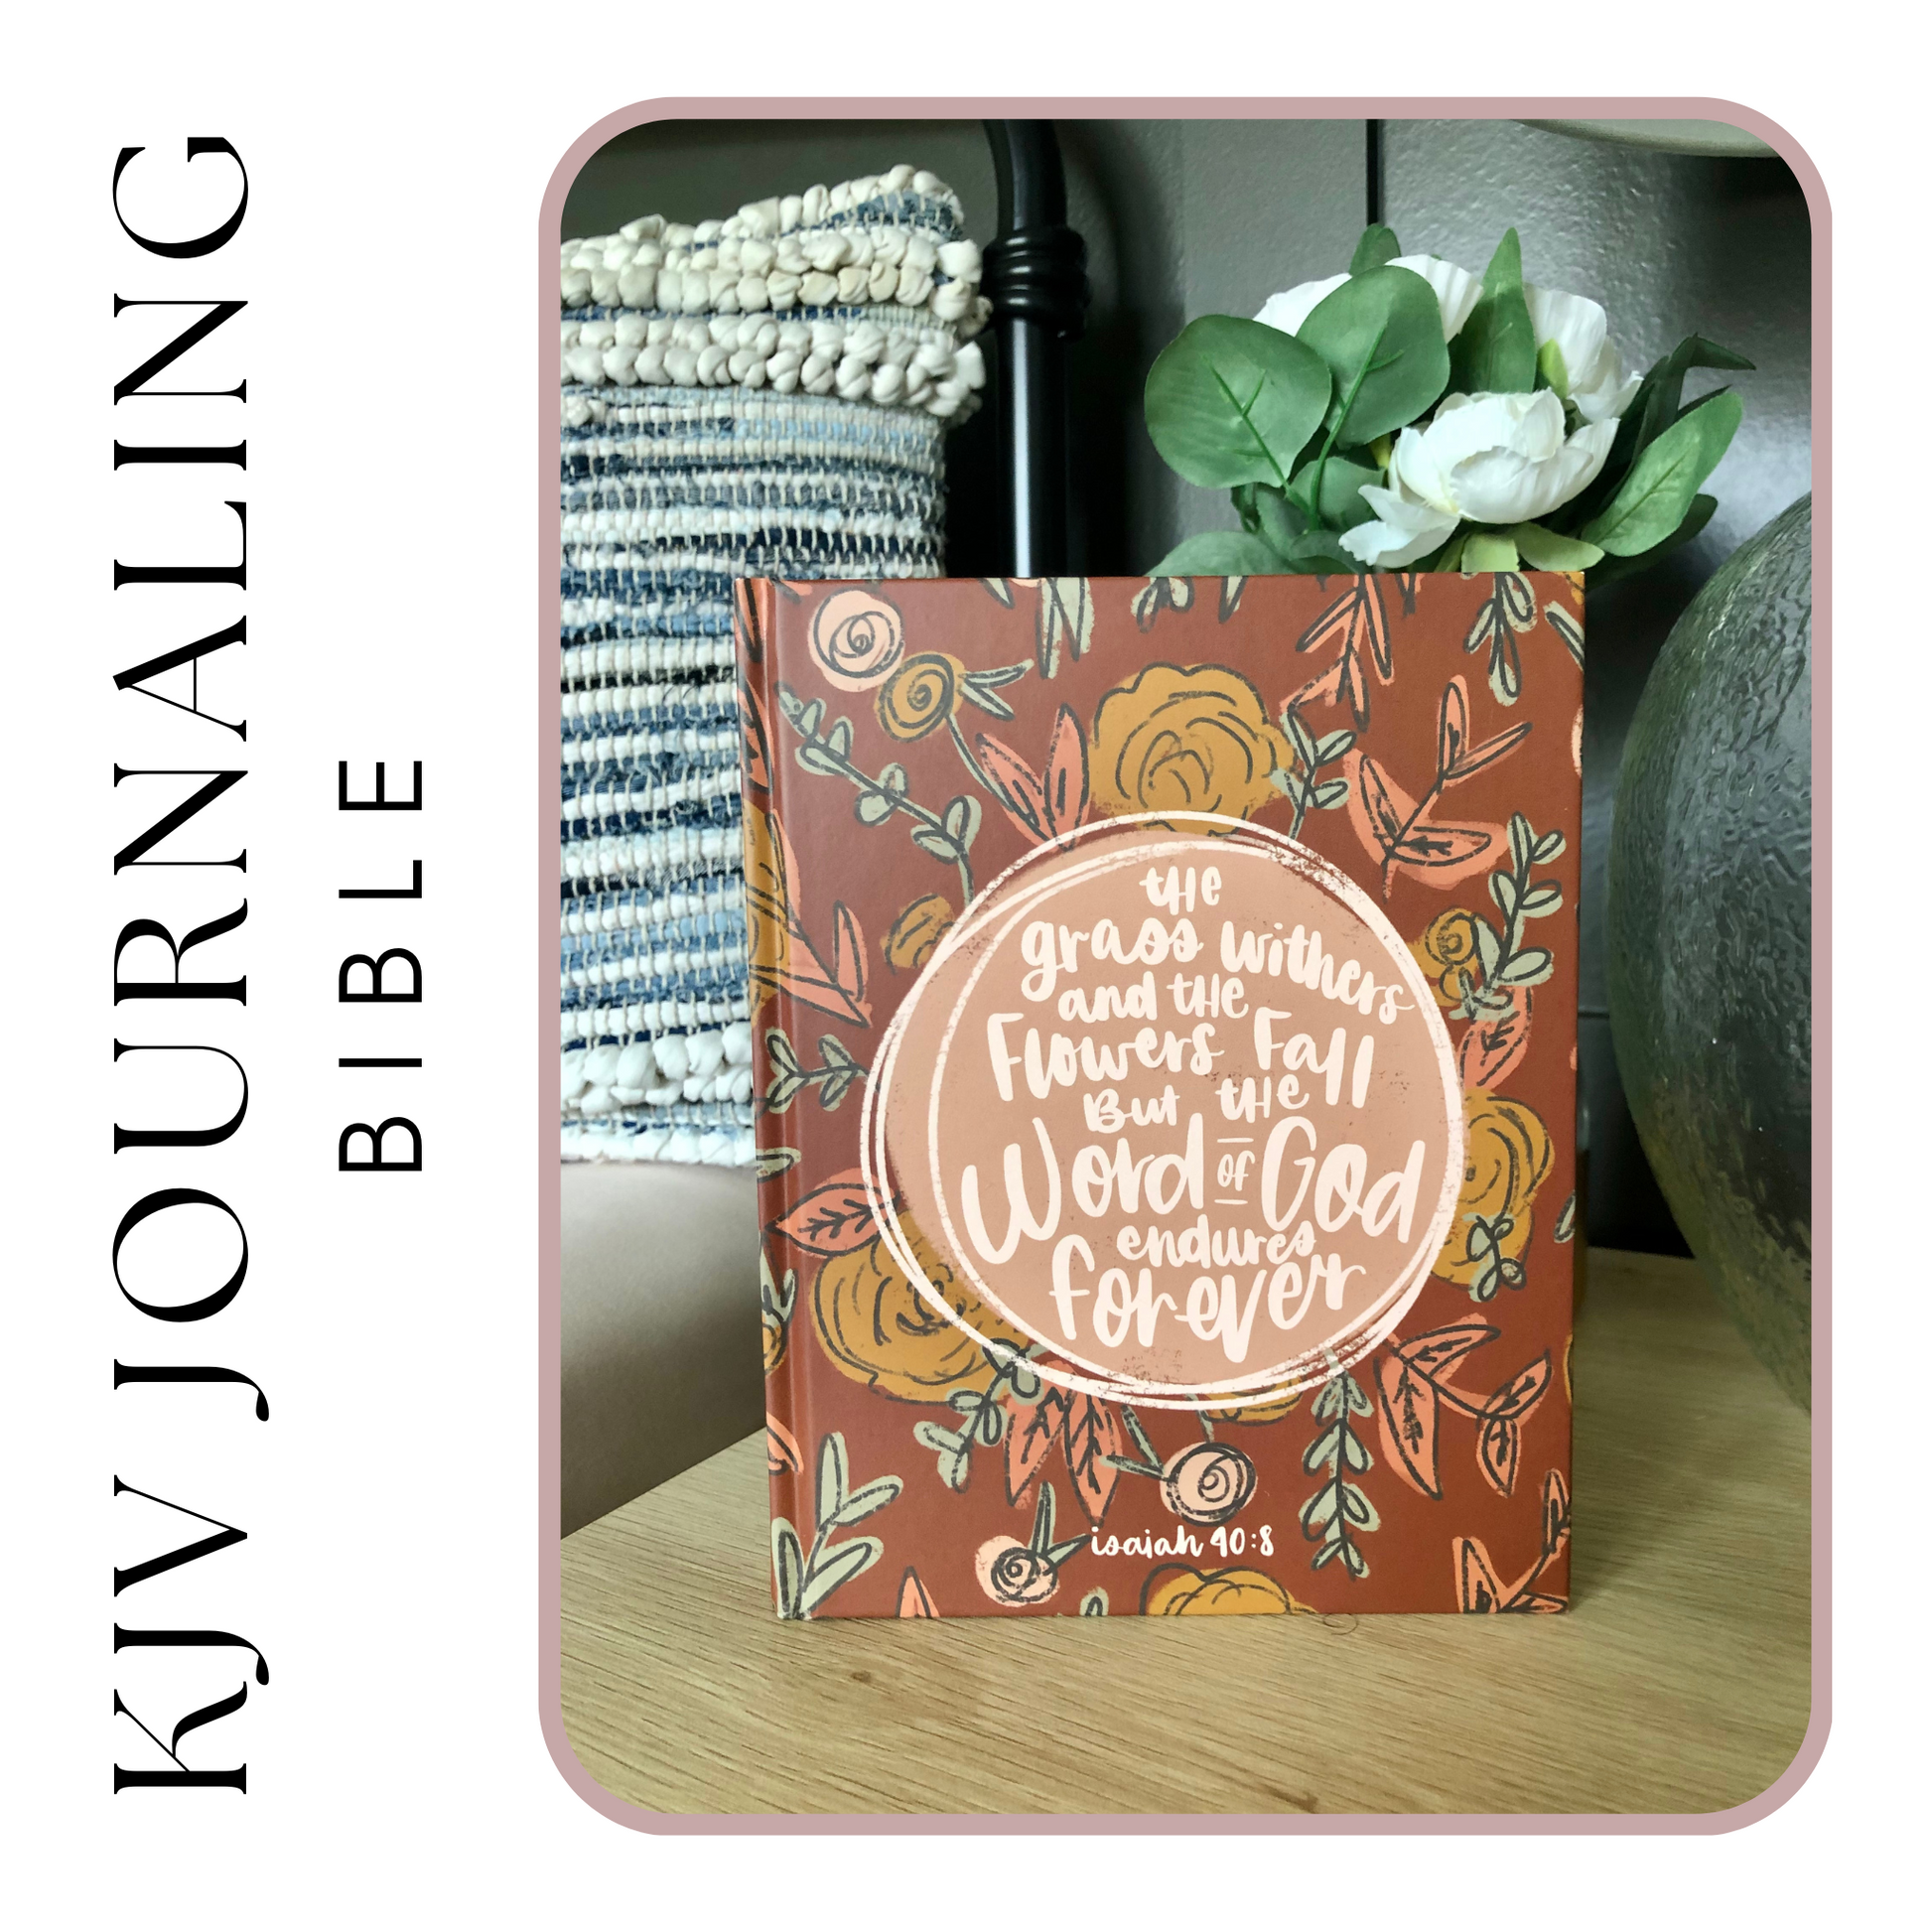 KJV Journaling Bible: Fall Floral Edition with vibrant autumnal hues and delicate flower designs.